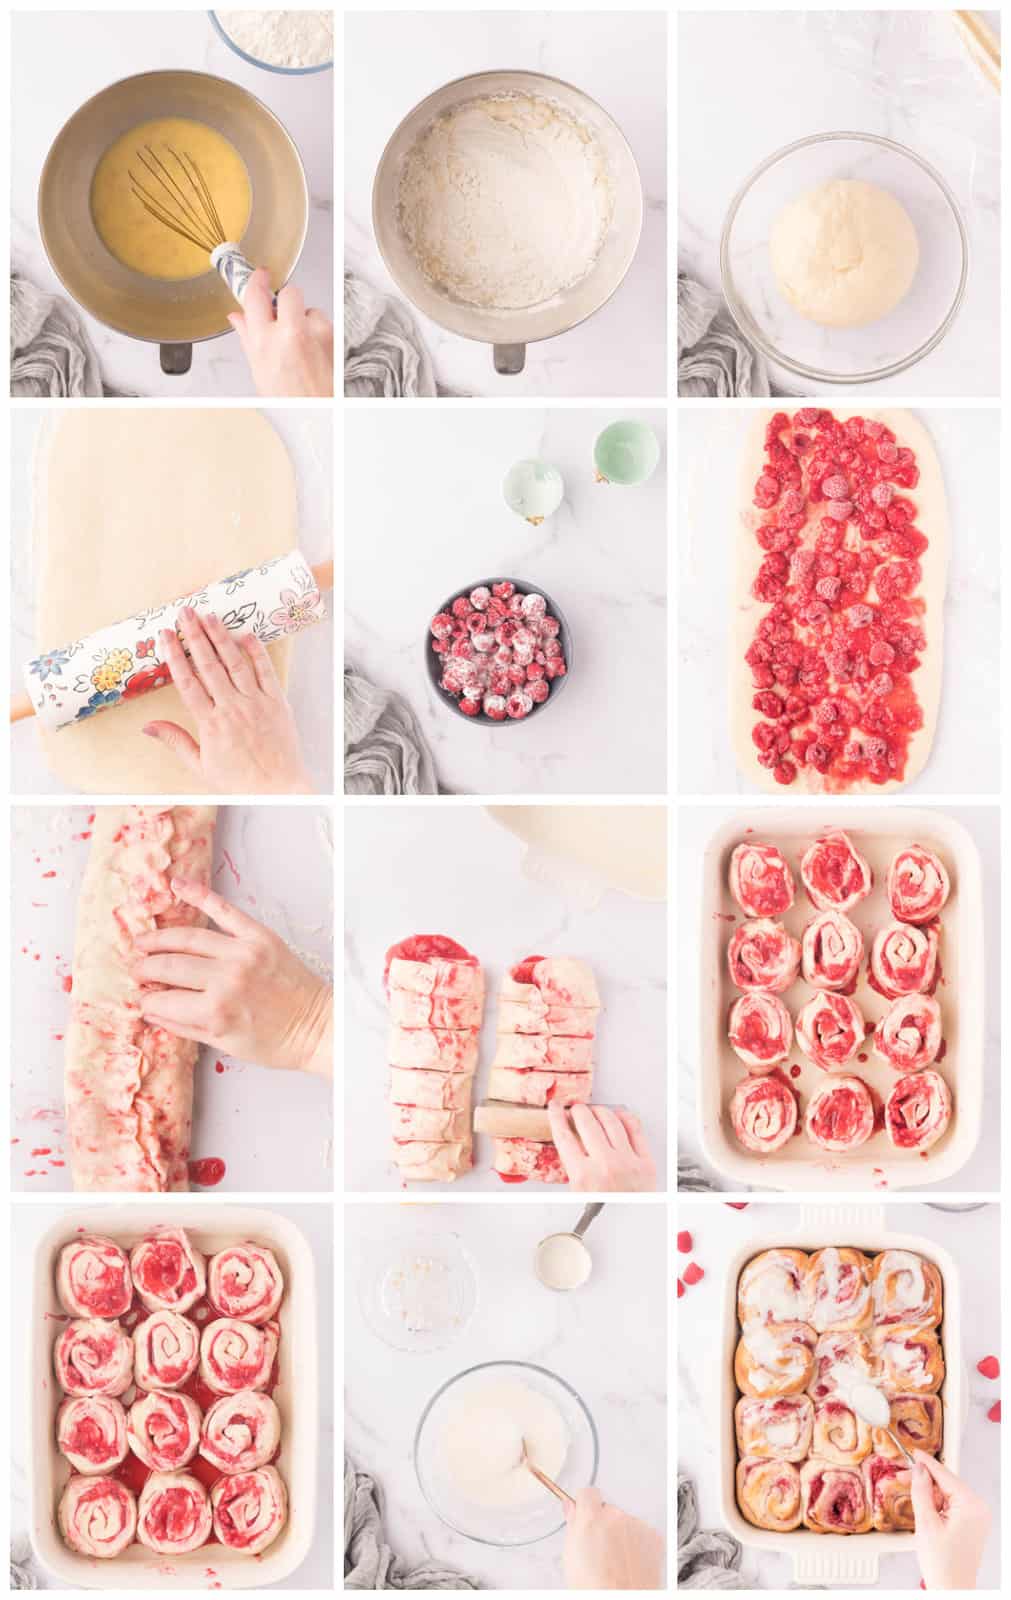 Step by step photos on how to make Raspberry Sweet Rolls.